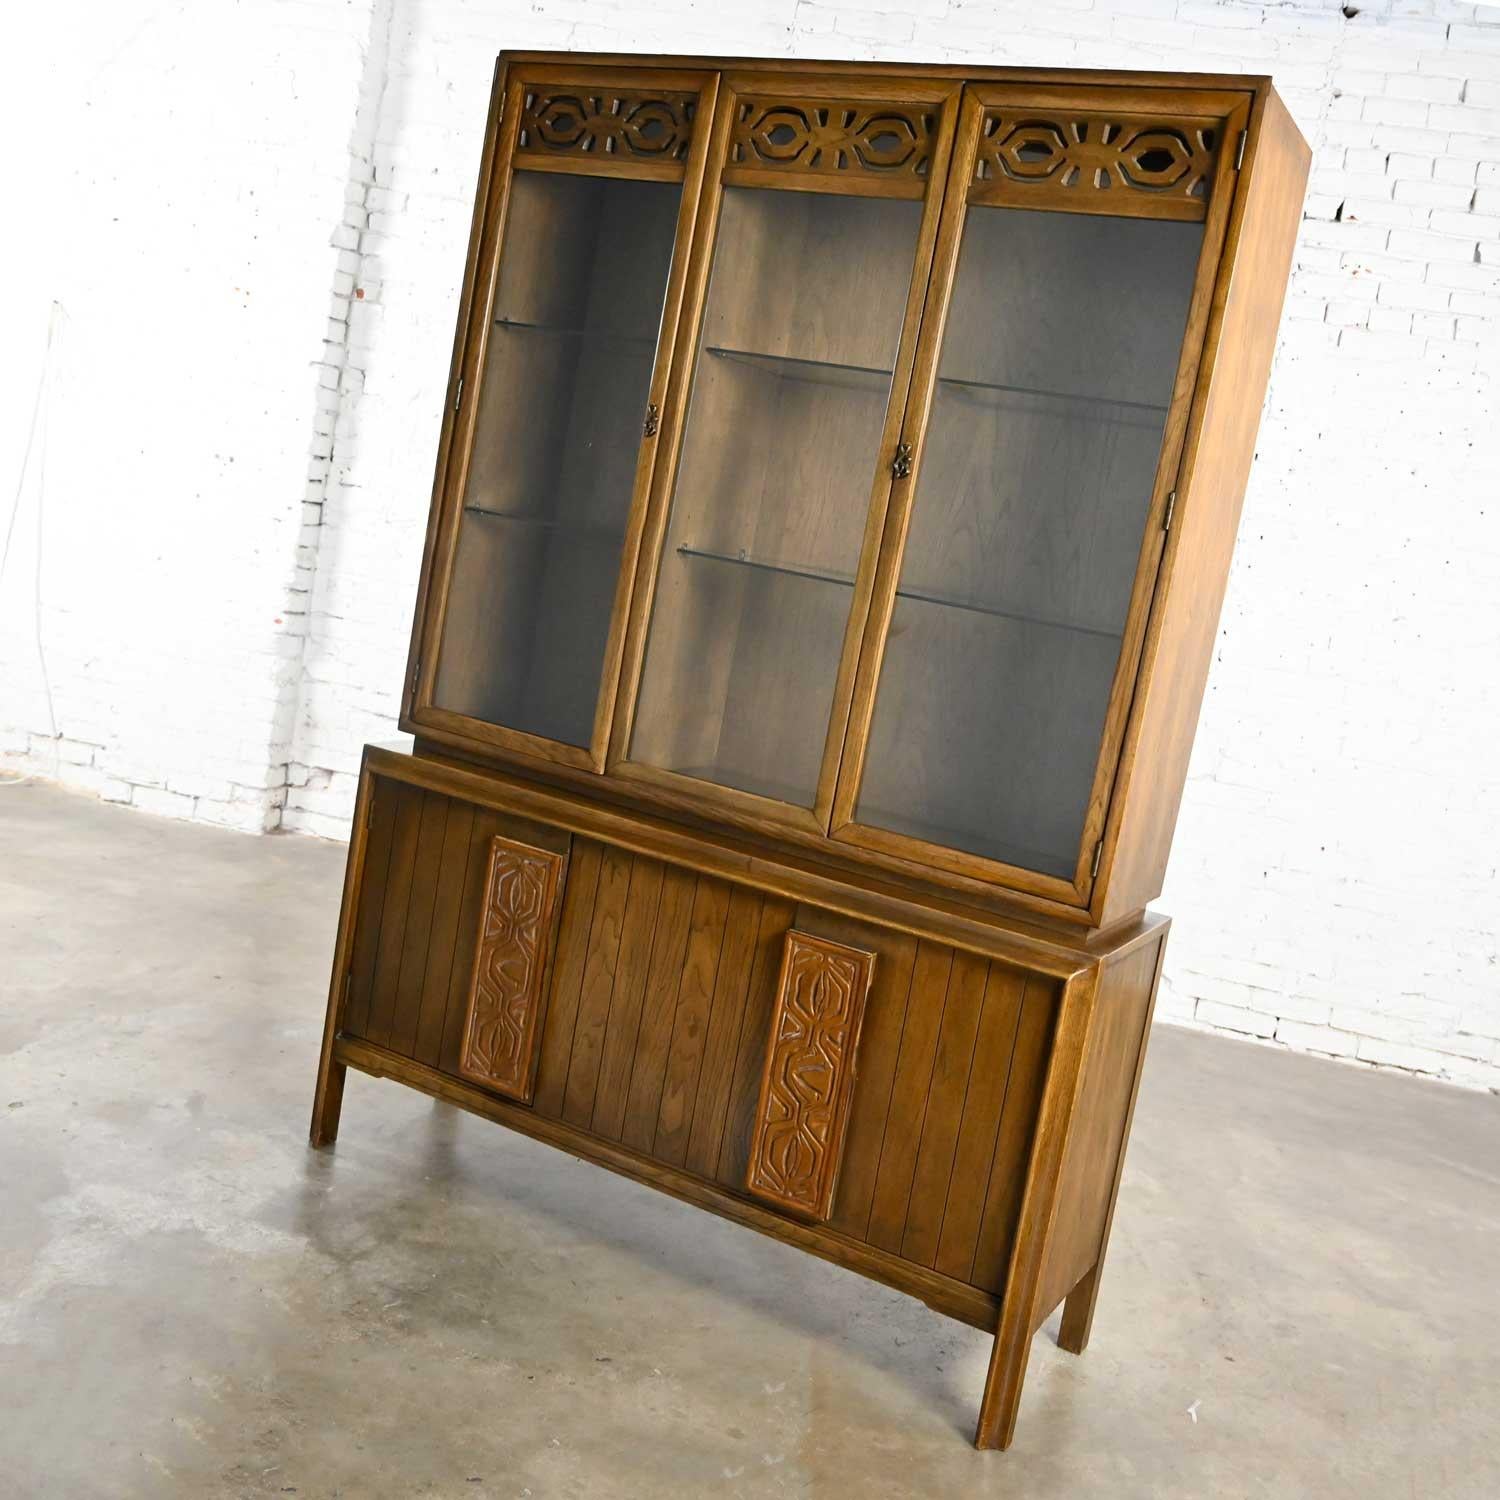 Lovely Mid-Century Modern one-piece Kroehler china cabinet or hutch with adjustable glass shelves, brass plated sculpted handles and hinges, lights, vertical carved door handles with waxed or whitewash finish, and horizontal carved designs on the